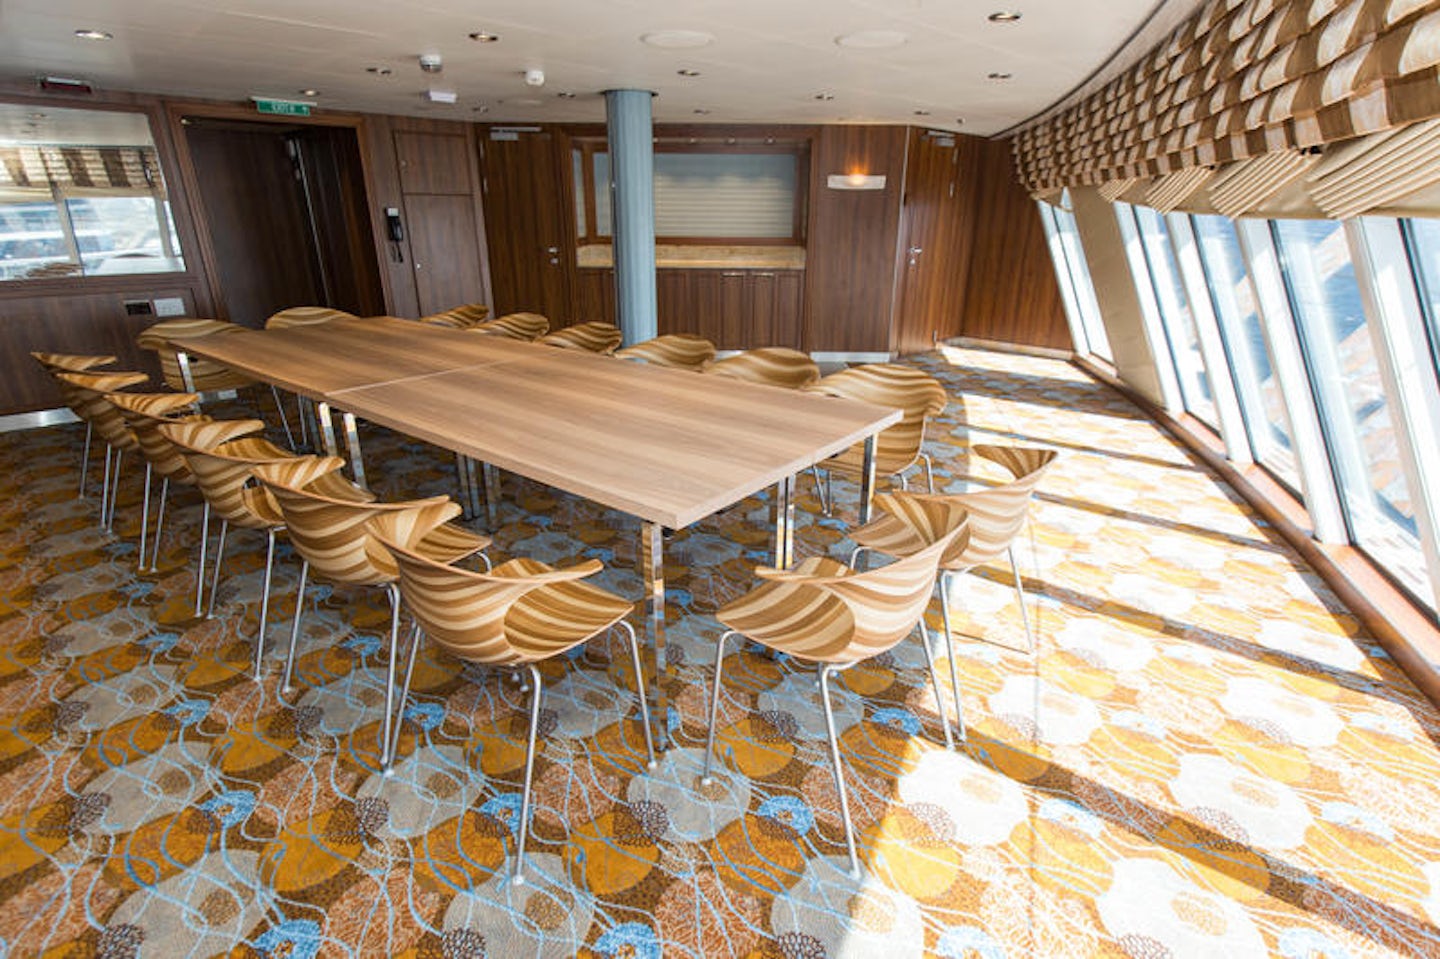 Conference Center on Anthem of the Seas